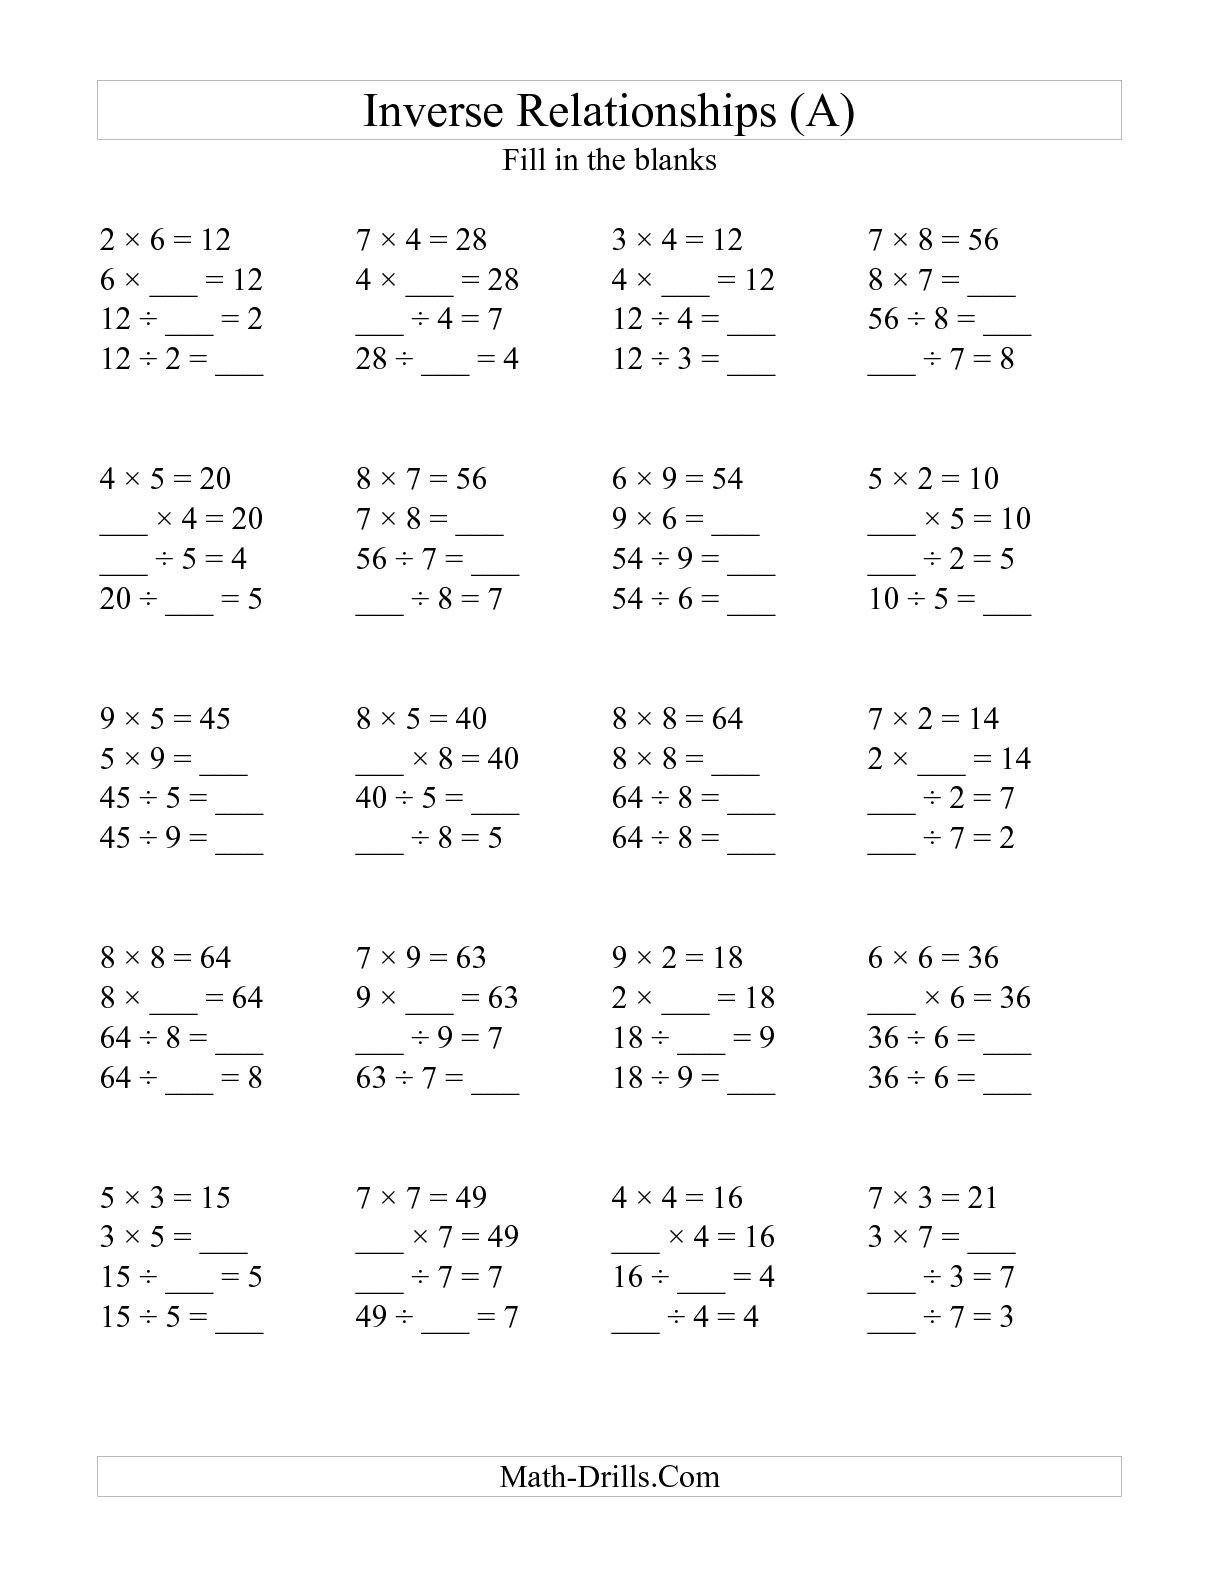 15-best-images-of-basic-multiplication-and-division-worksheets-division-worksheets-long